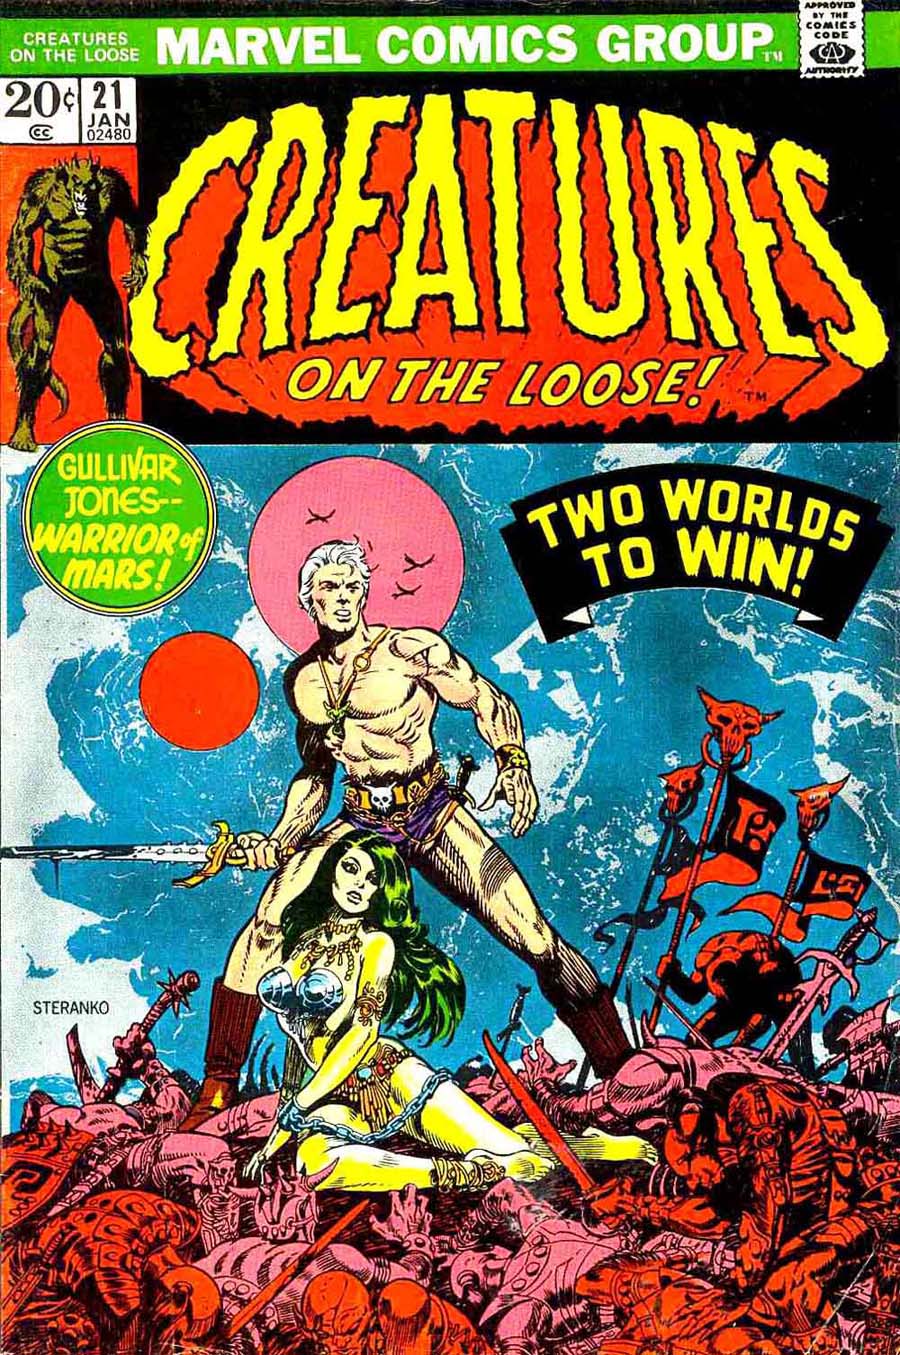 Creatures On The Loose v1 #21 marvel 1970s bronze age comic book cover art by Jim Steranko